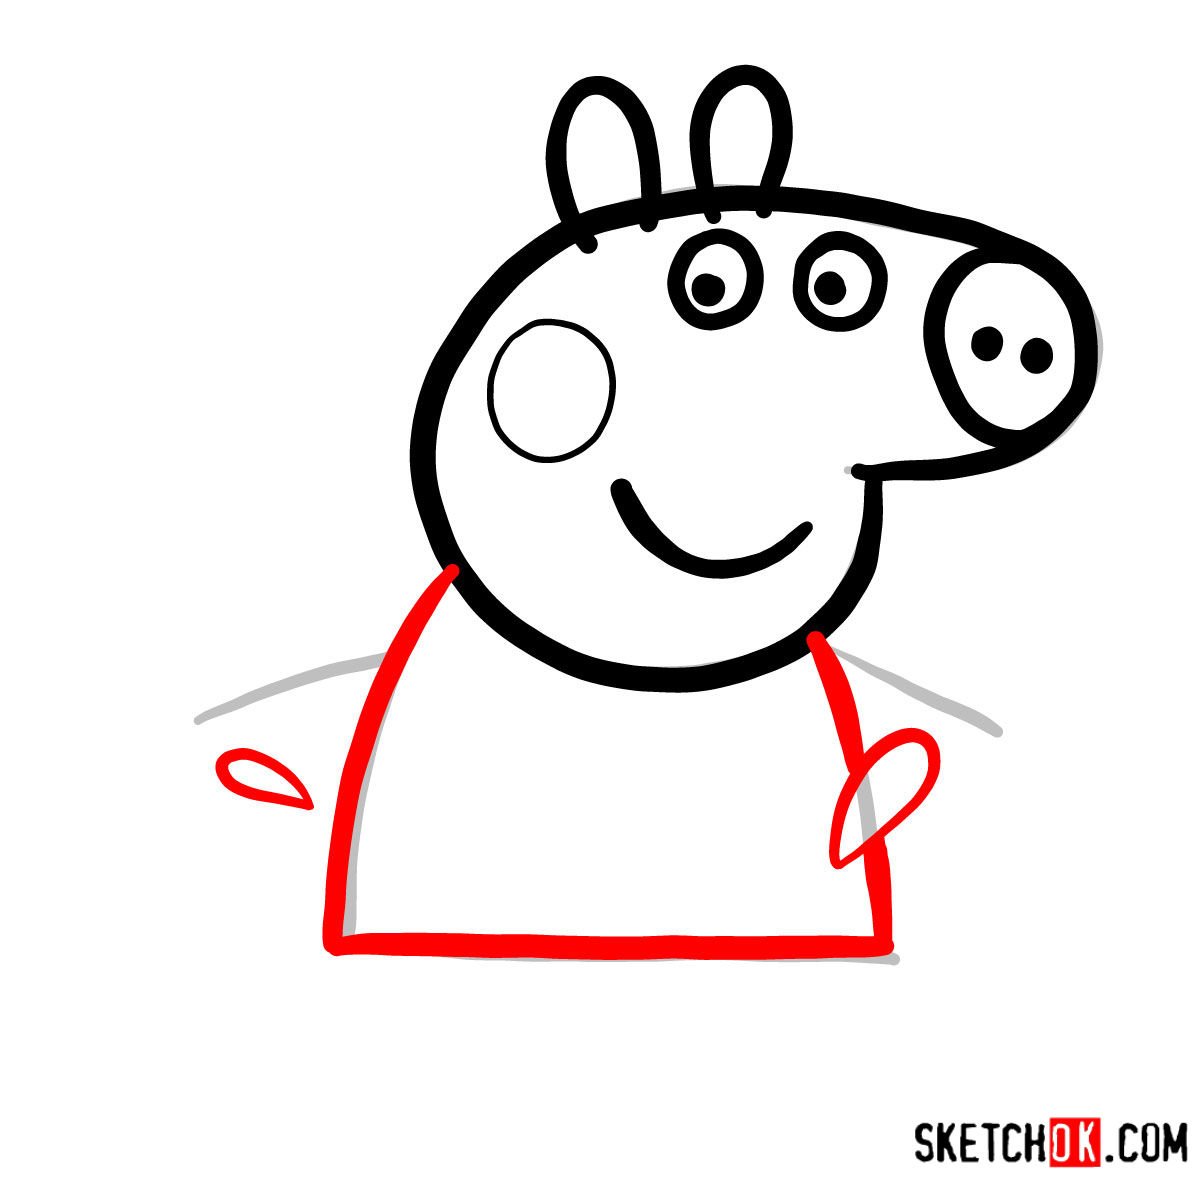 How to draw Peppa Pig in the mud puddle - step 05